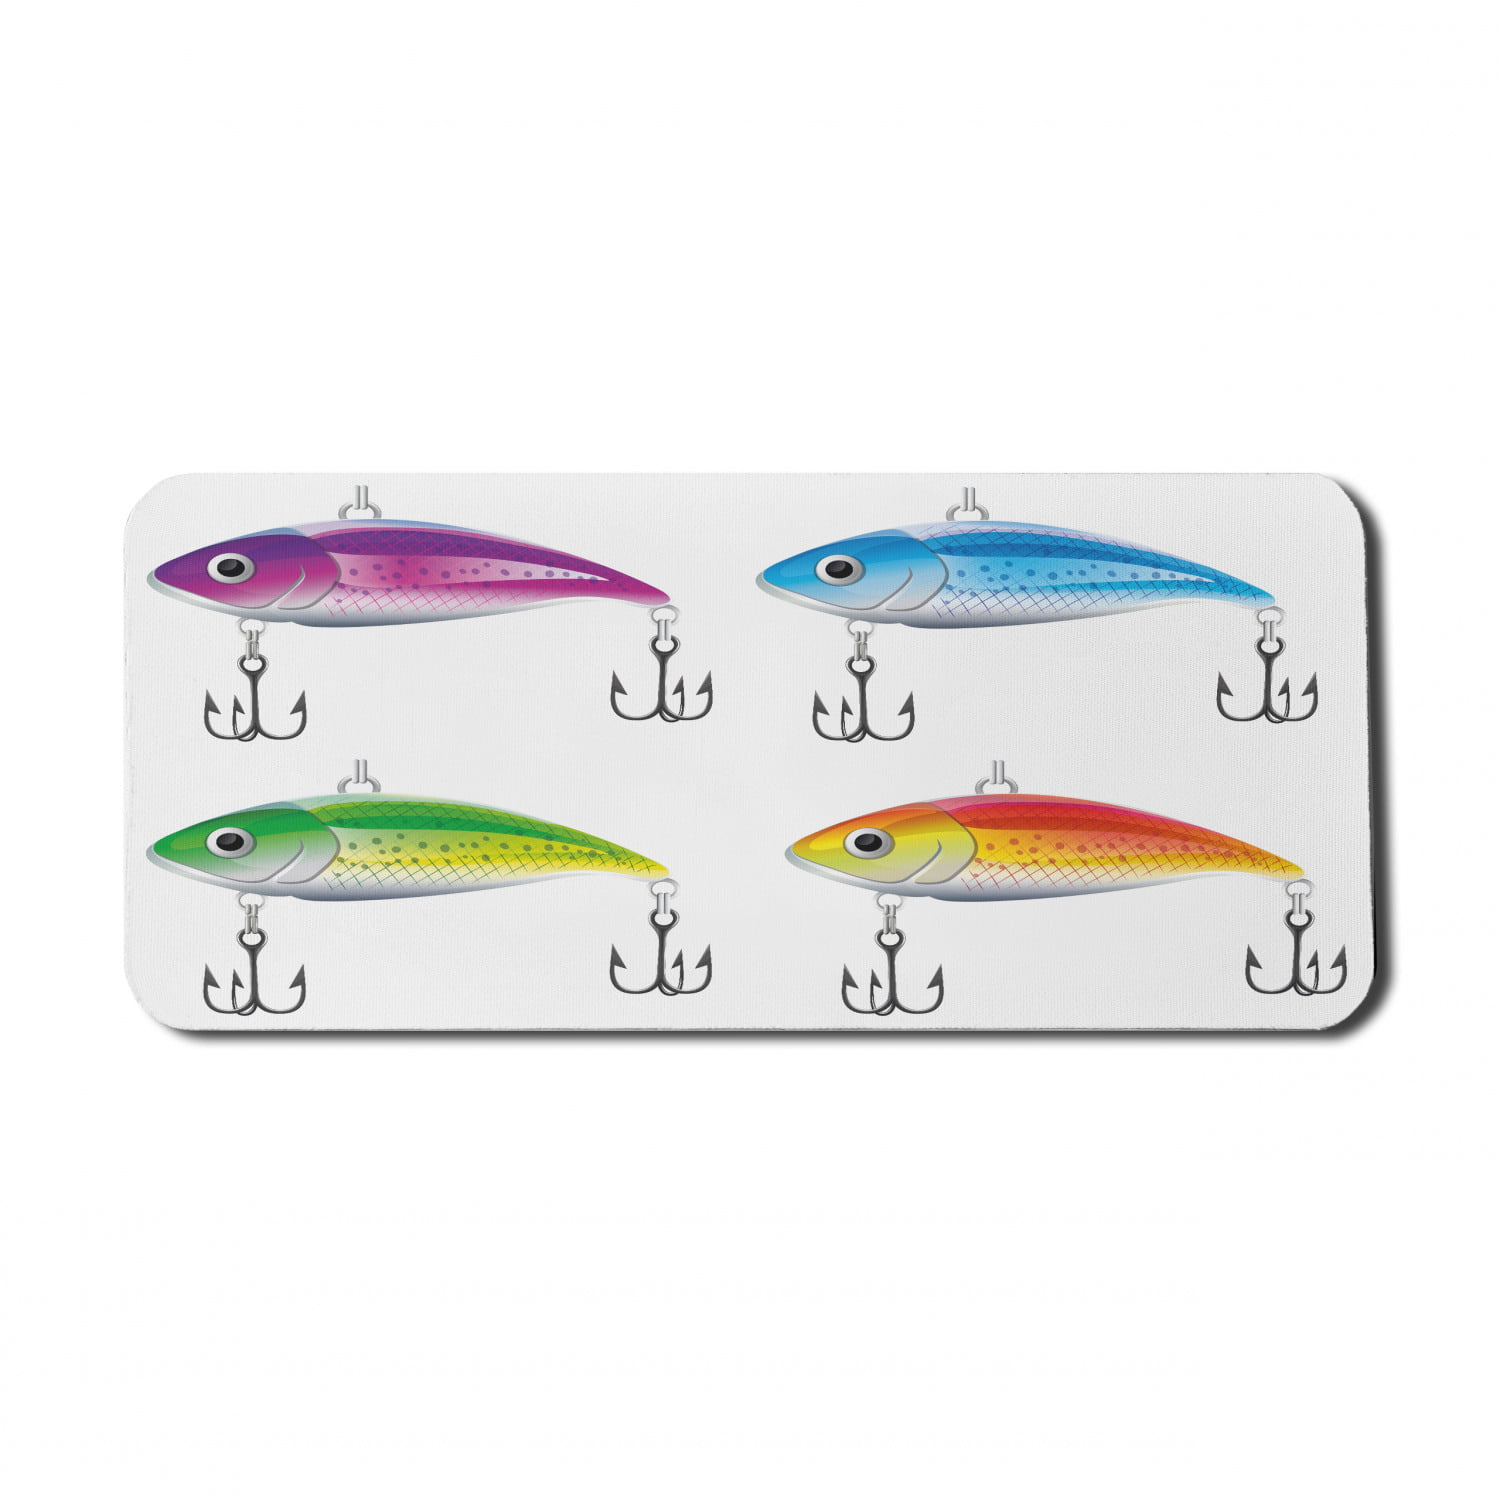 Fishing Computer Mouse Pad, Composition of Fishing Lures in Trout Shape Trap for Sea Mammals Creatures Picture, Rectangle Non-Slip Rubber Mousepad